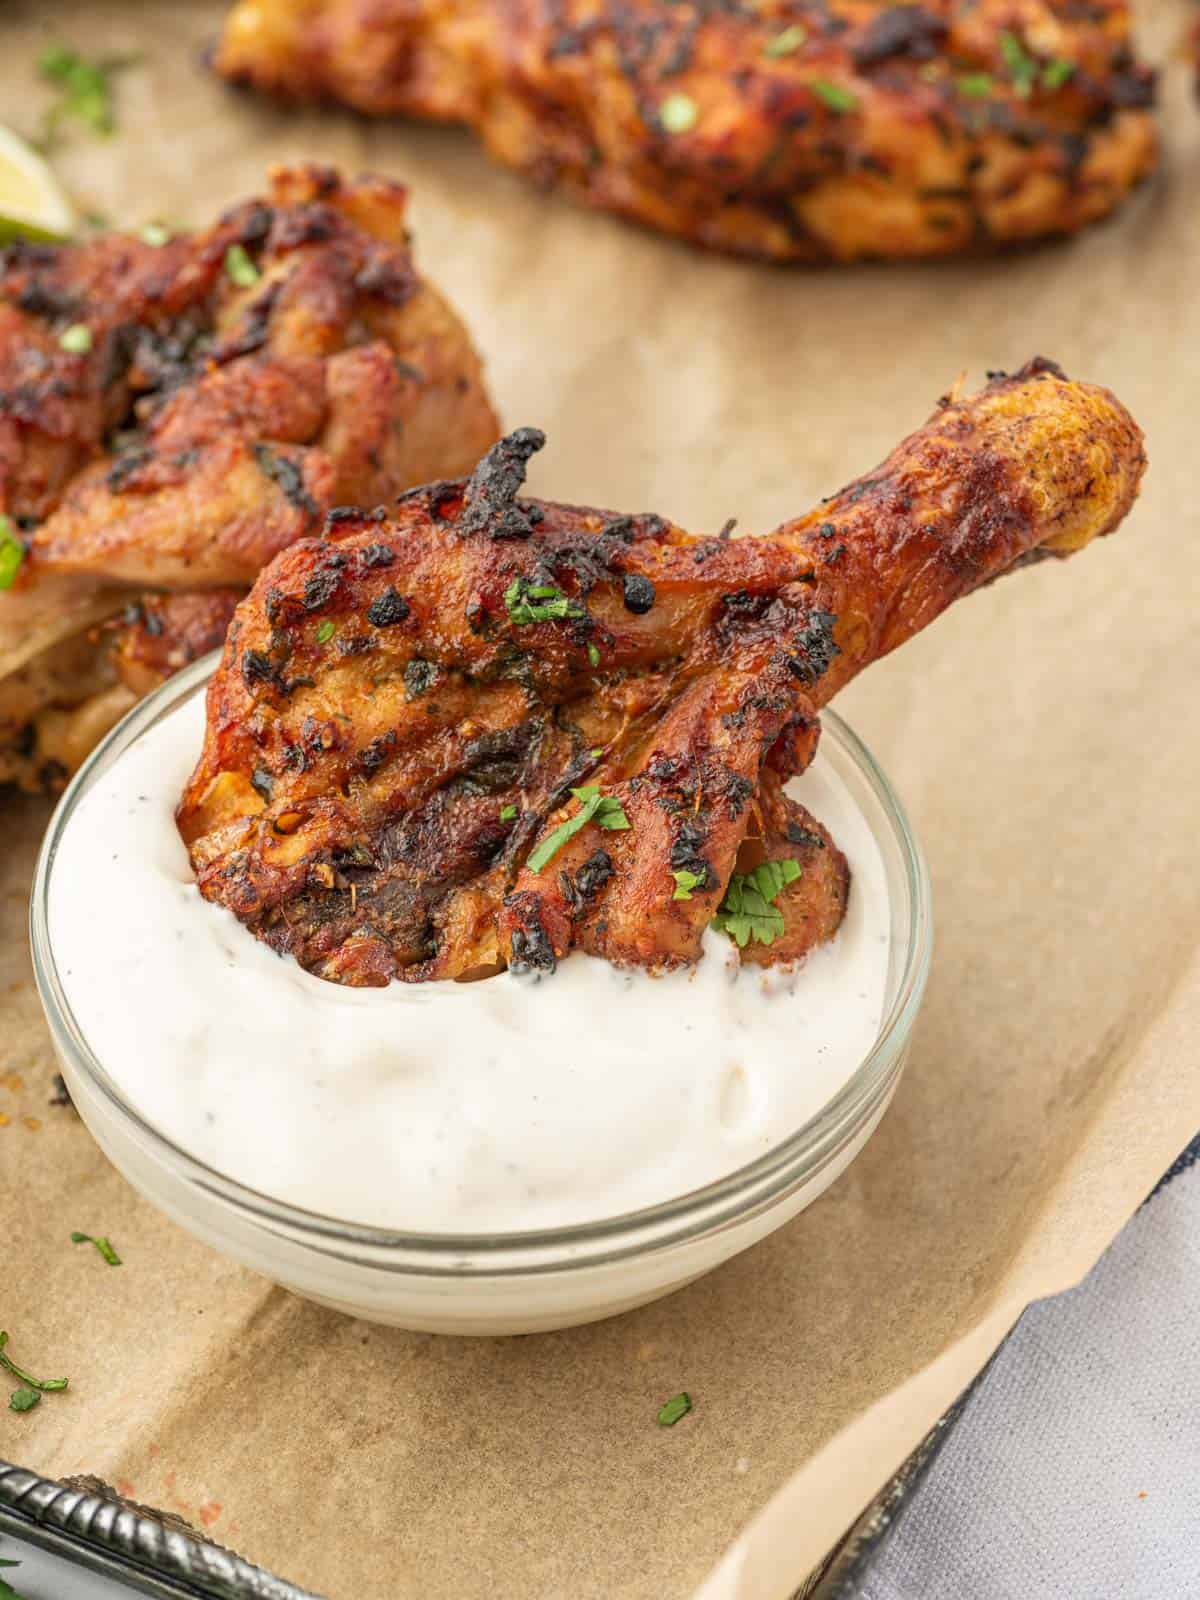 Cilantro lime chicken legs dunked into a creamy dip.